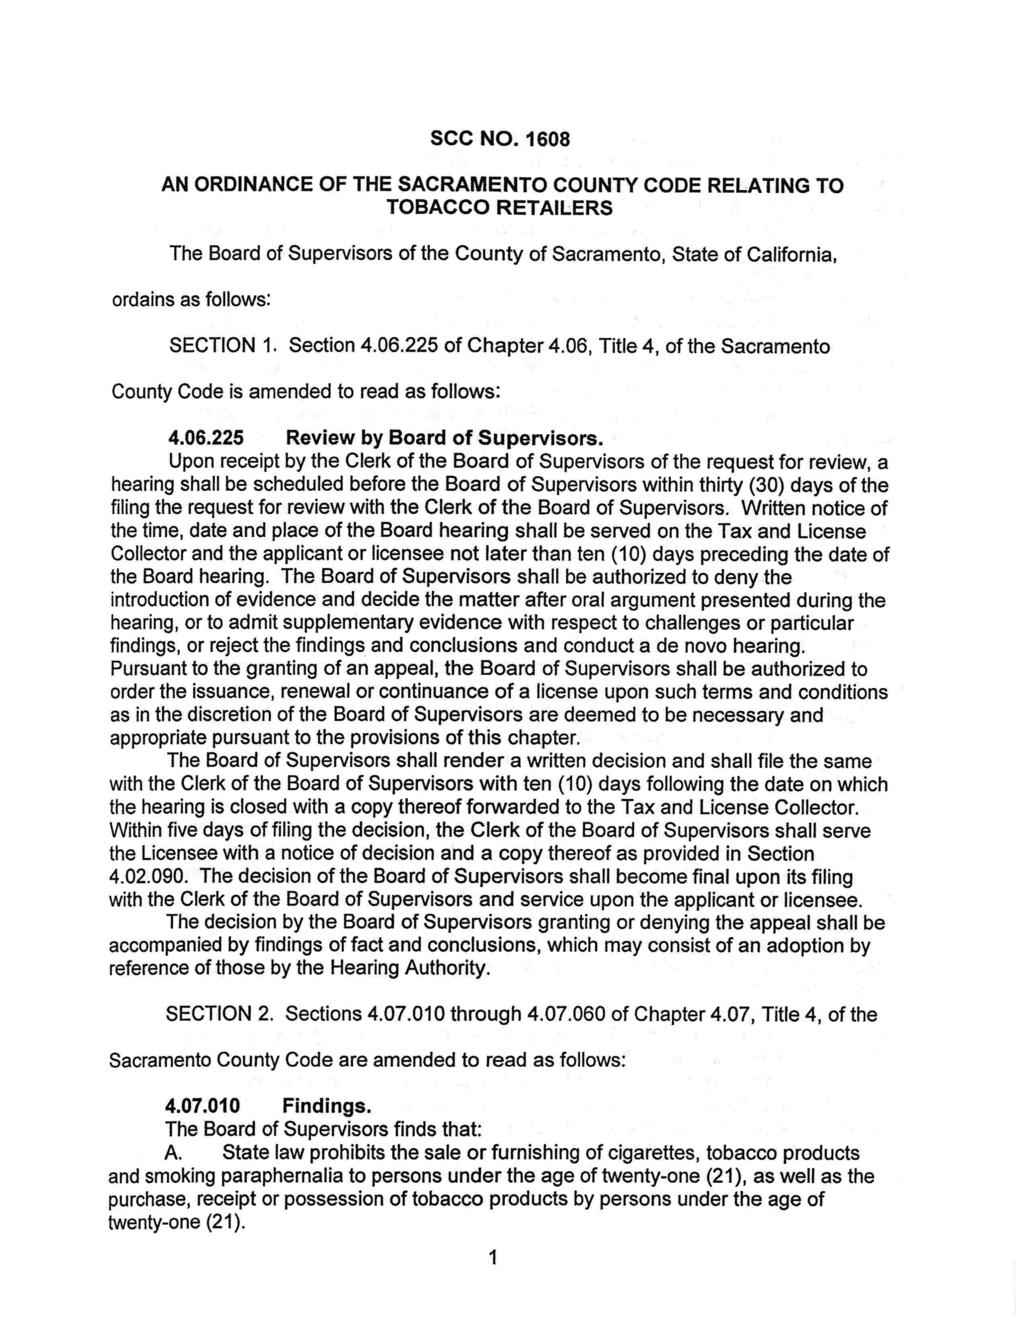 SCC NO. 1608 AN ORDINANCE OF THE SACRAMENTO COUNTY CODE RELATING TO TOBACCO RETAILERS The Board of Supervisors of the County of Sacramento, State of California ordains as follows SECTION I Section 4.